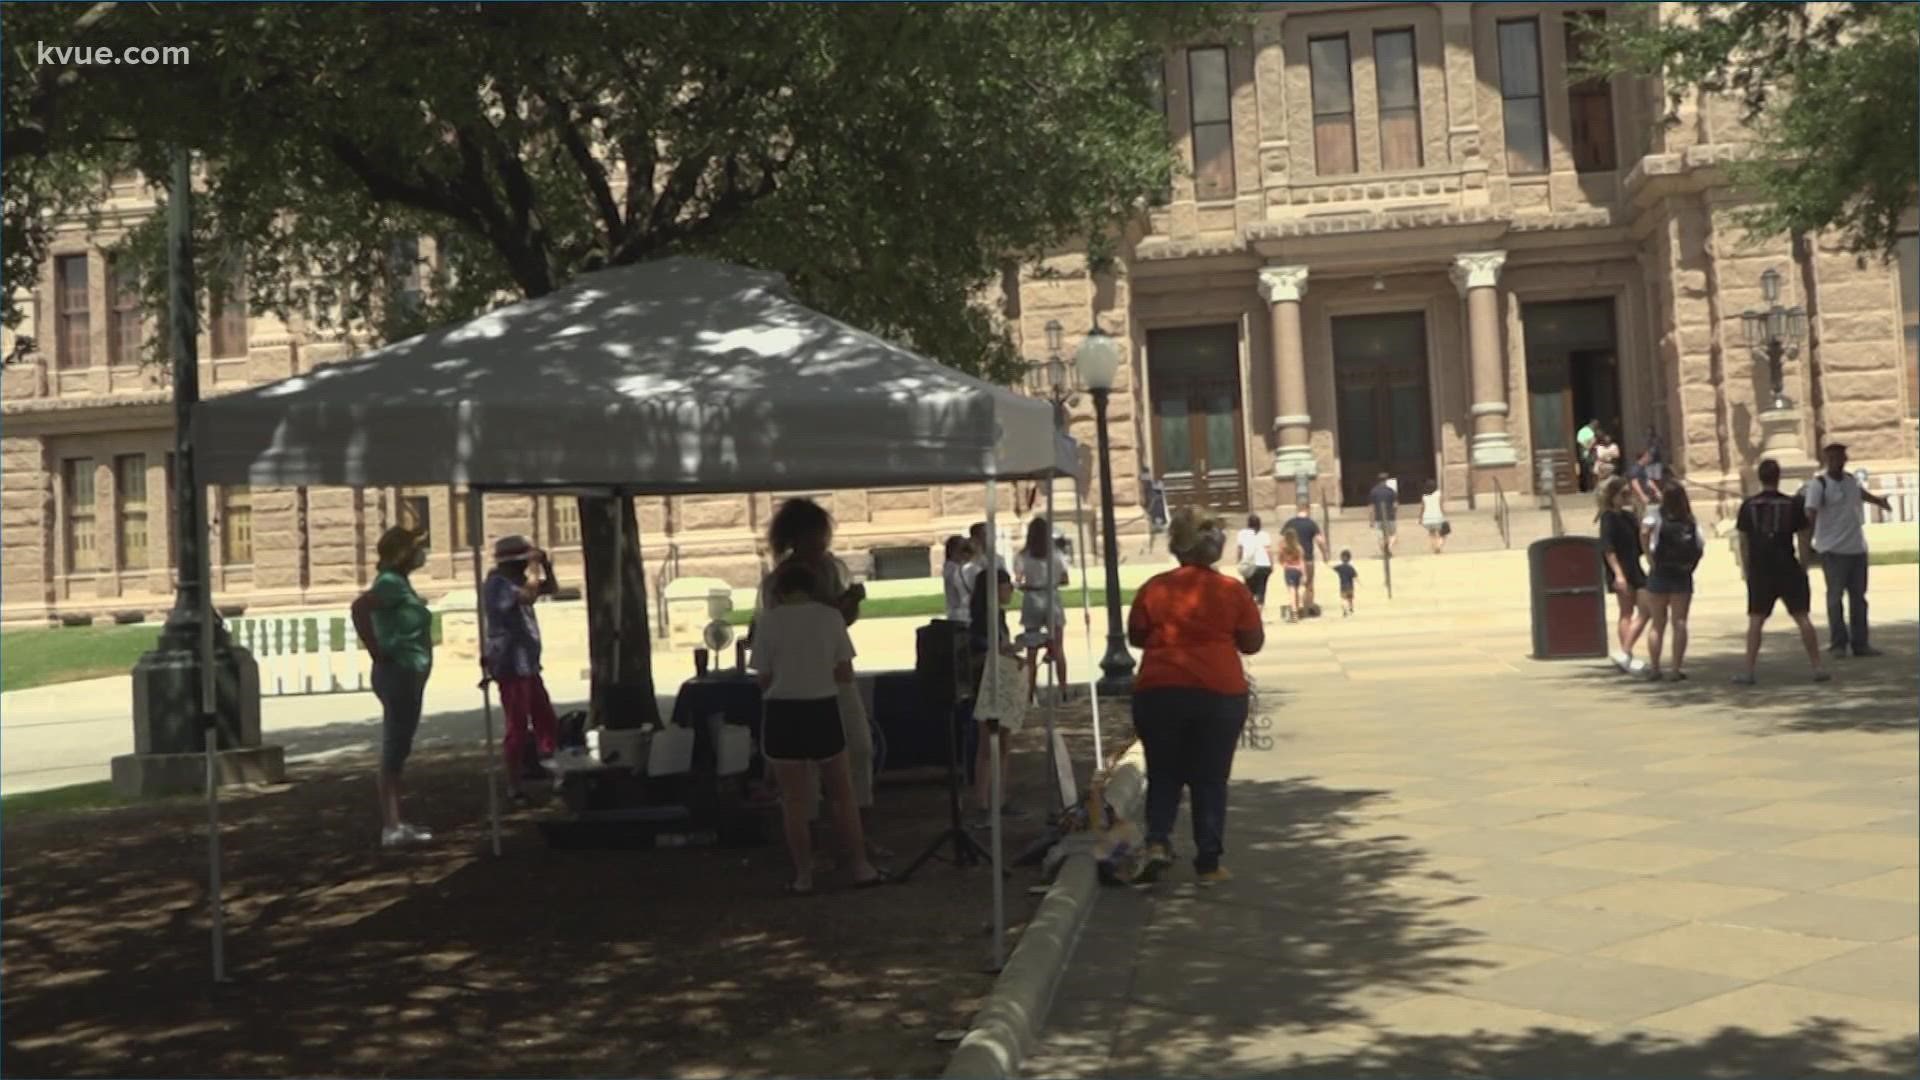 Texans across the state gathered at the Capitol Saturday for multiple protests.